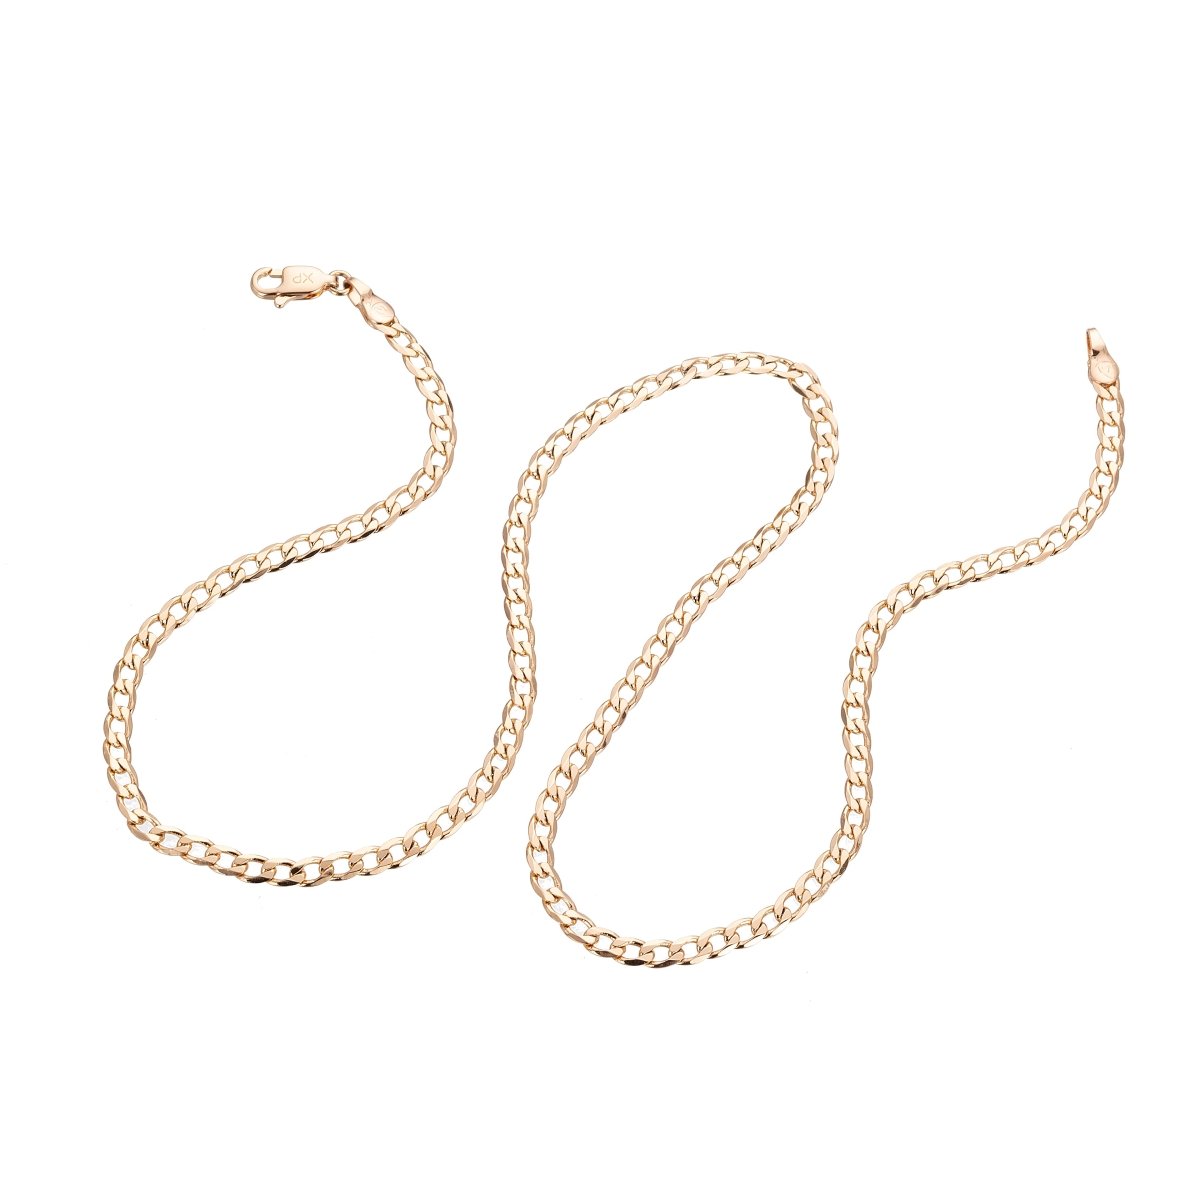 17 inch Curb Chain Necklace, 18K Gold Plated Curb Finished Necklace Chain For Jewelry Making, Dainty 2mm Curb Necklace w/Lobster Clasps | CN-284 Clearance Pricing - DLUXCA